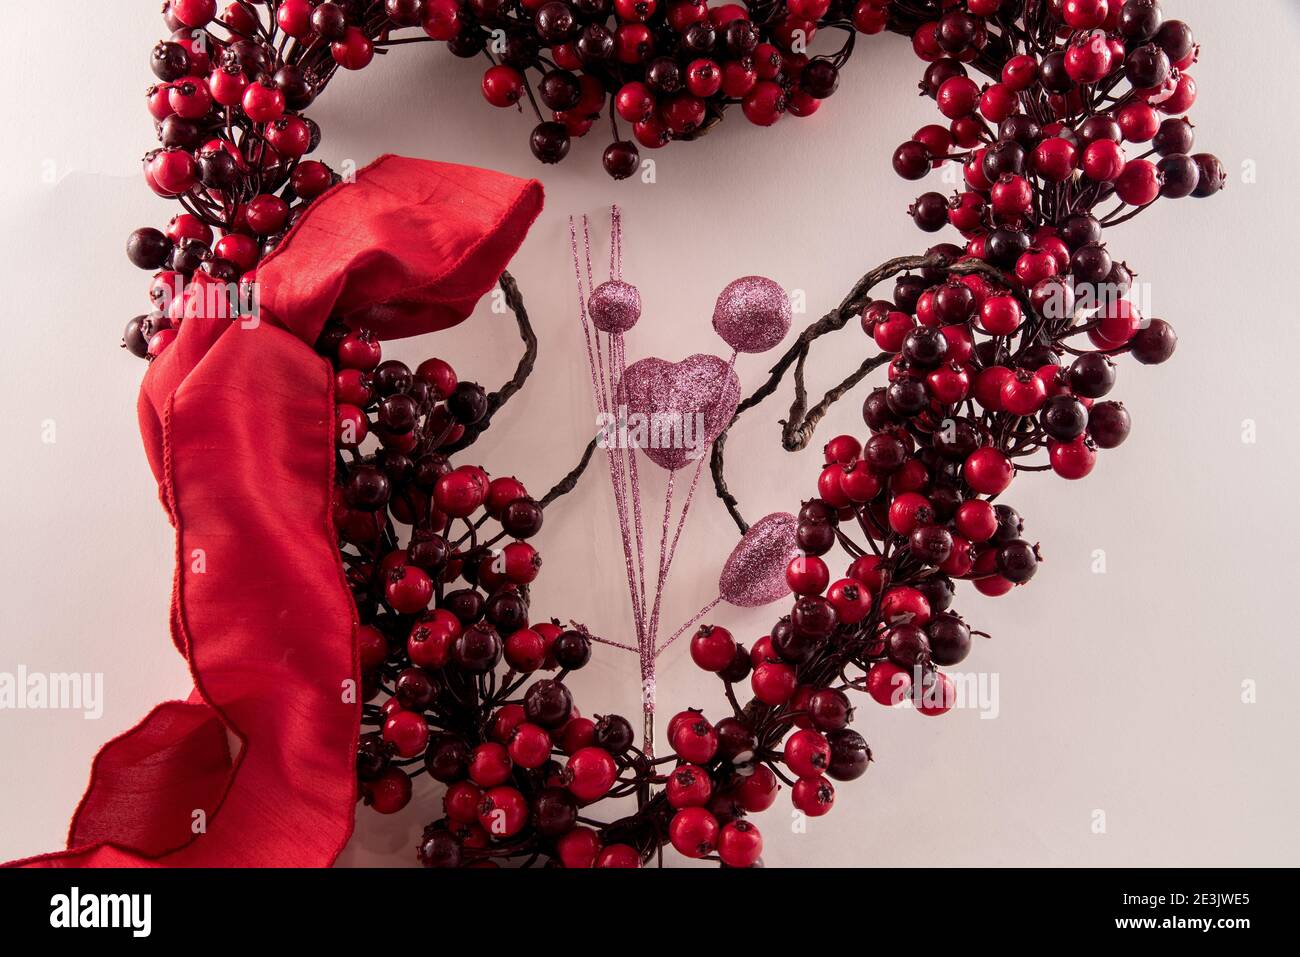 Heart shaped berry wreath and red bow against a white background. Stock Photo